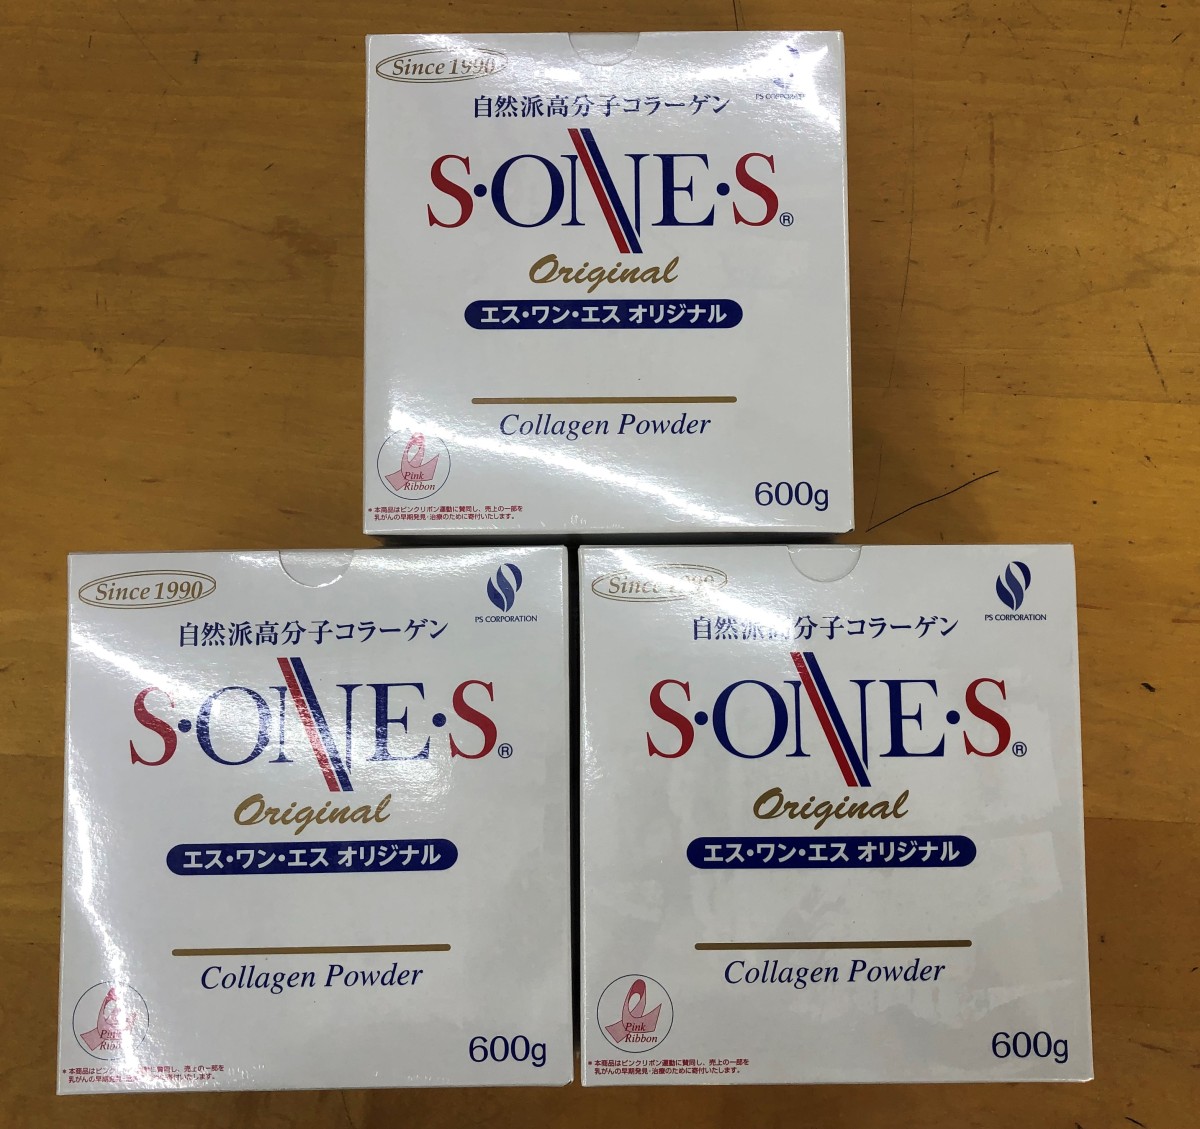  nationwide free shipping dokta-z* brand es* one *es original 600g×3 piece set 1.8 kilo ( box. wrapping is is . is doing in regard to understanding order please )